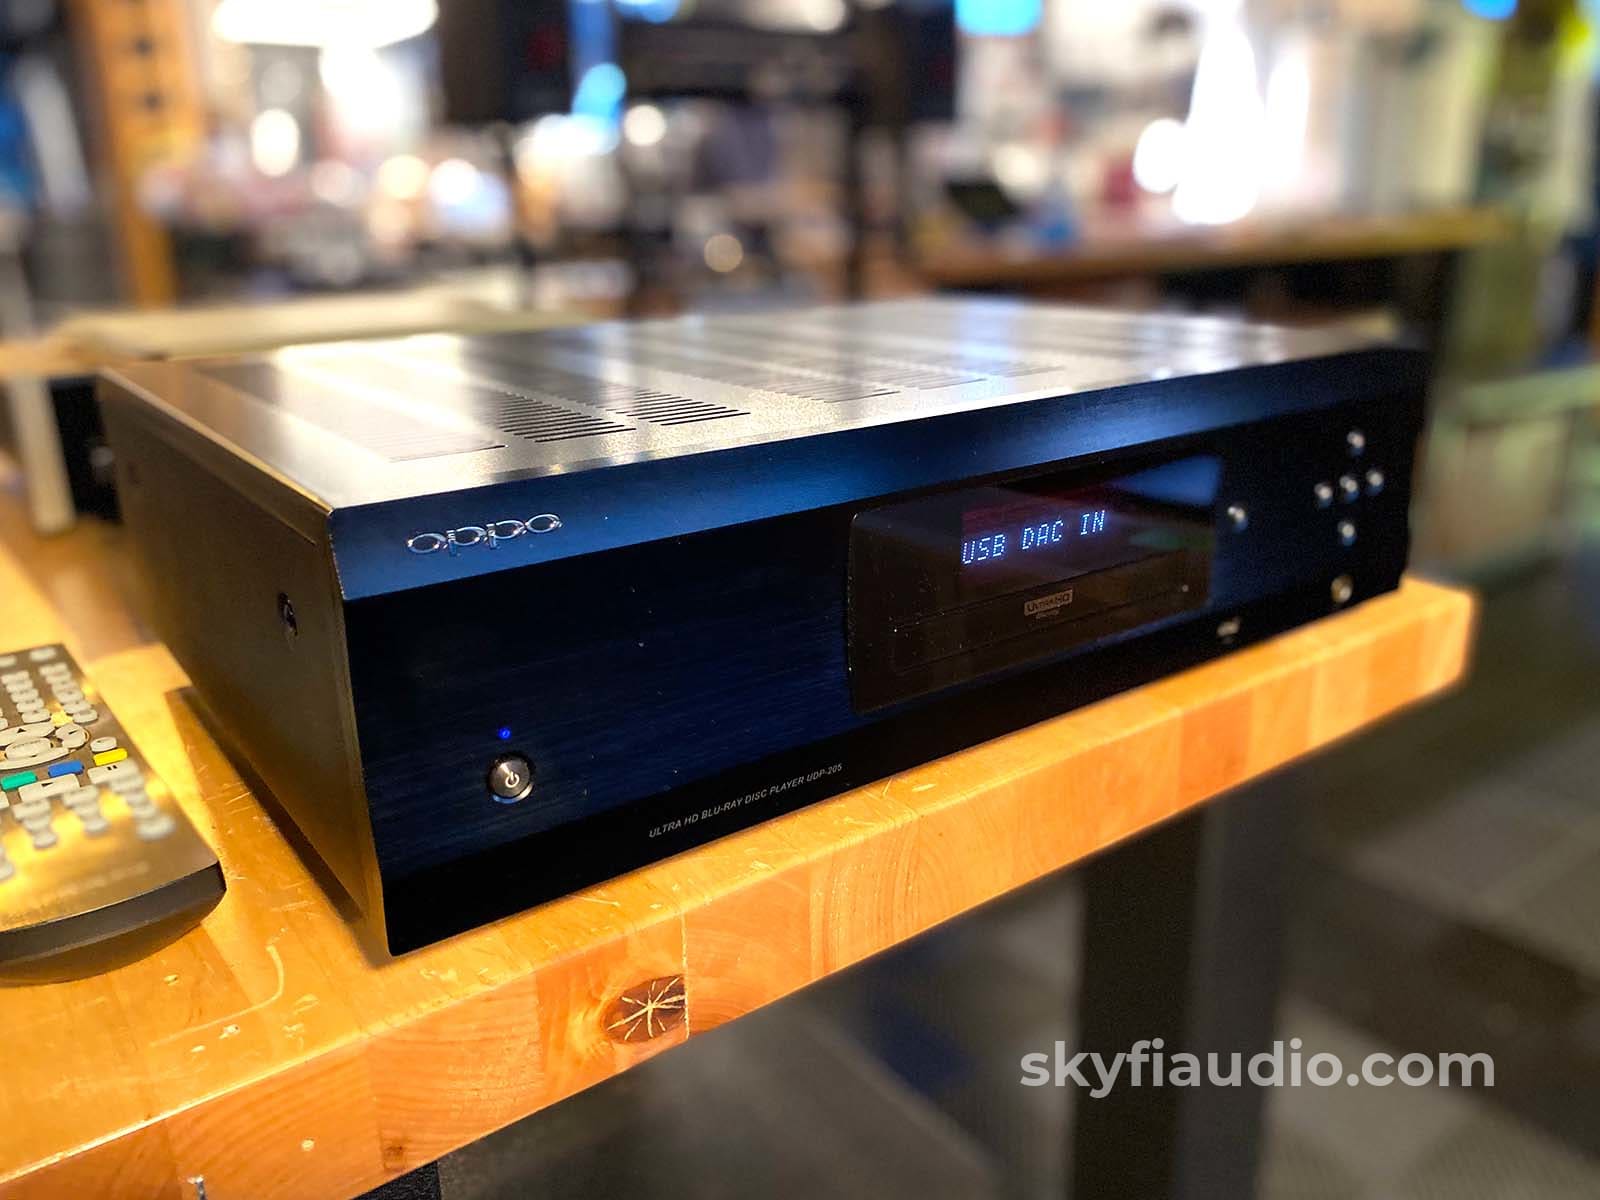 OPPO UDP-203 4K Ultra HD Blu-ray Disc Player Preview